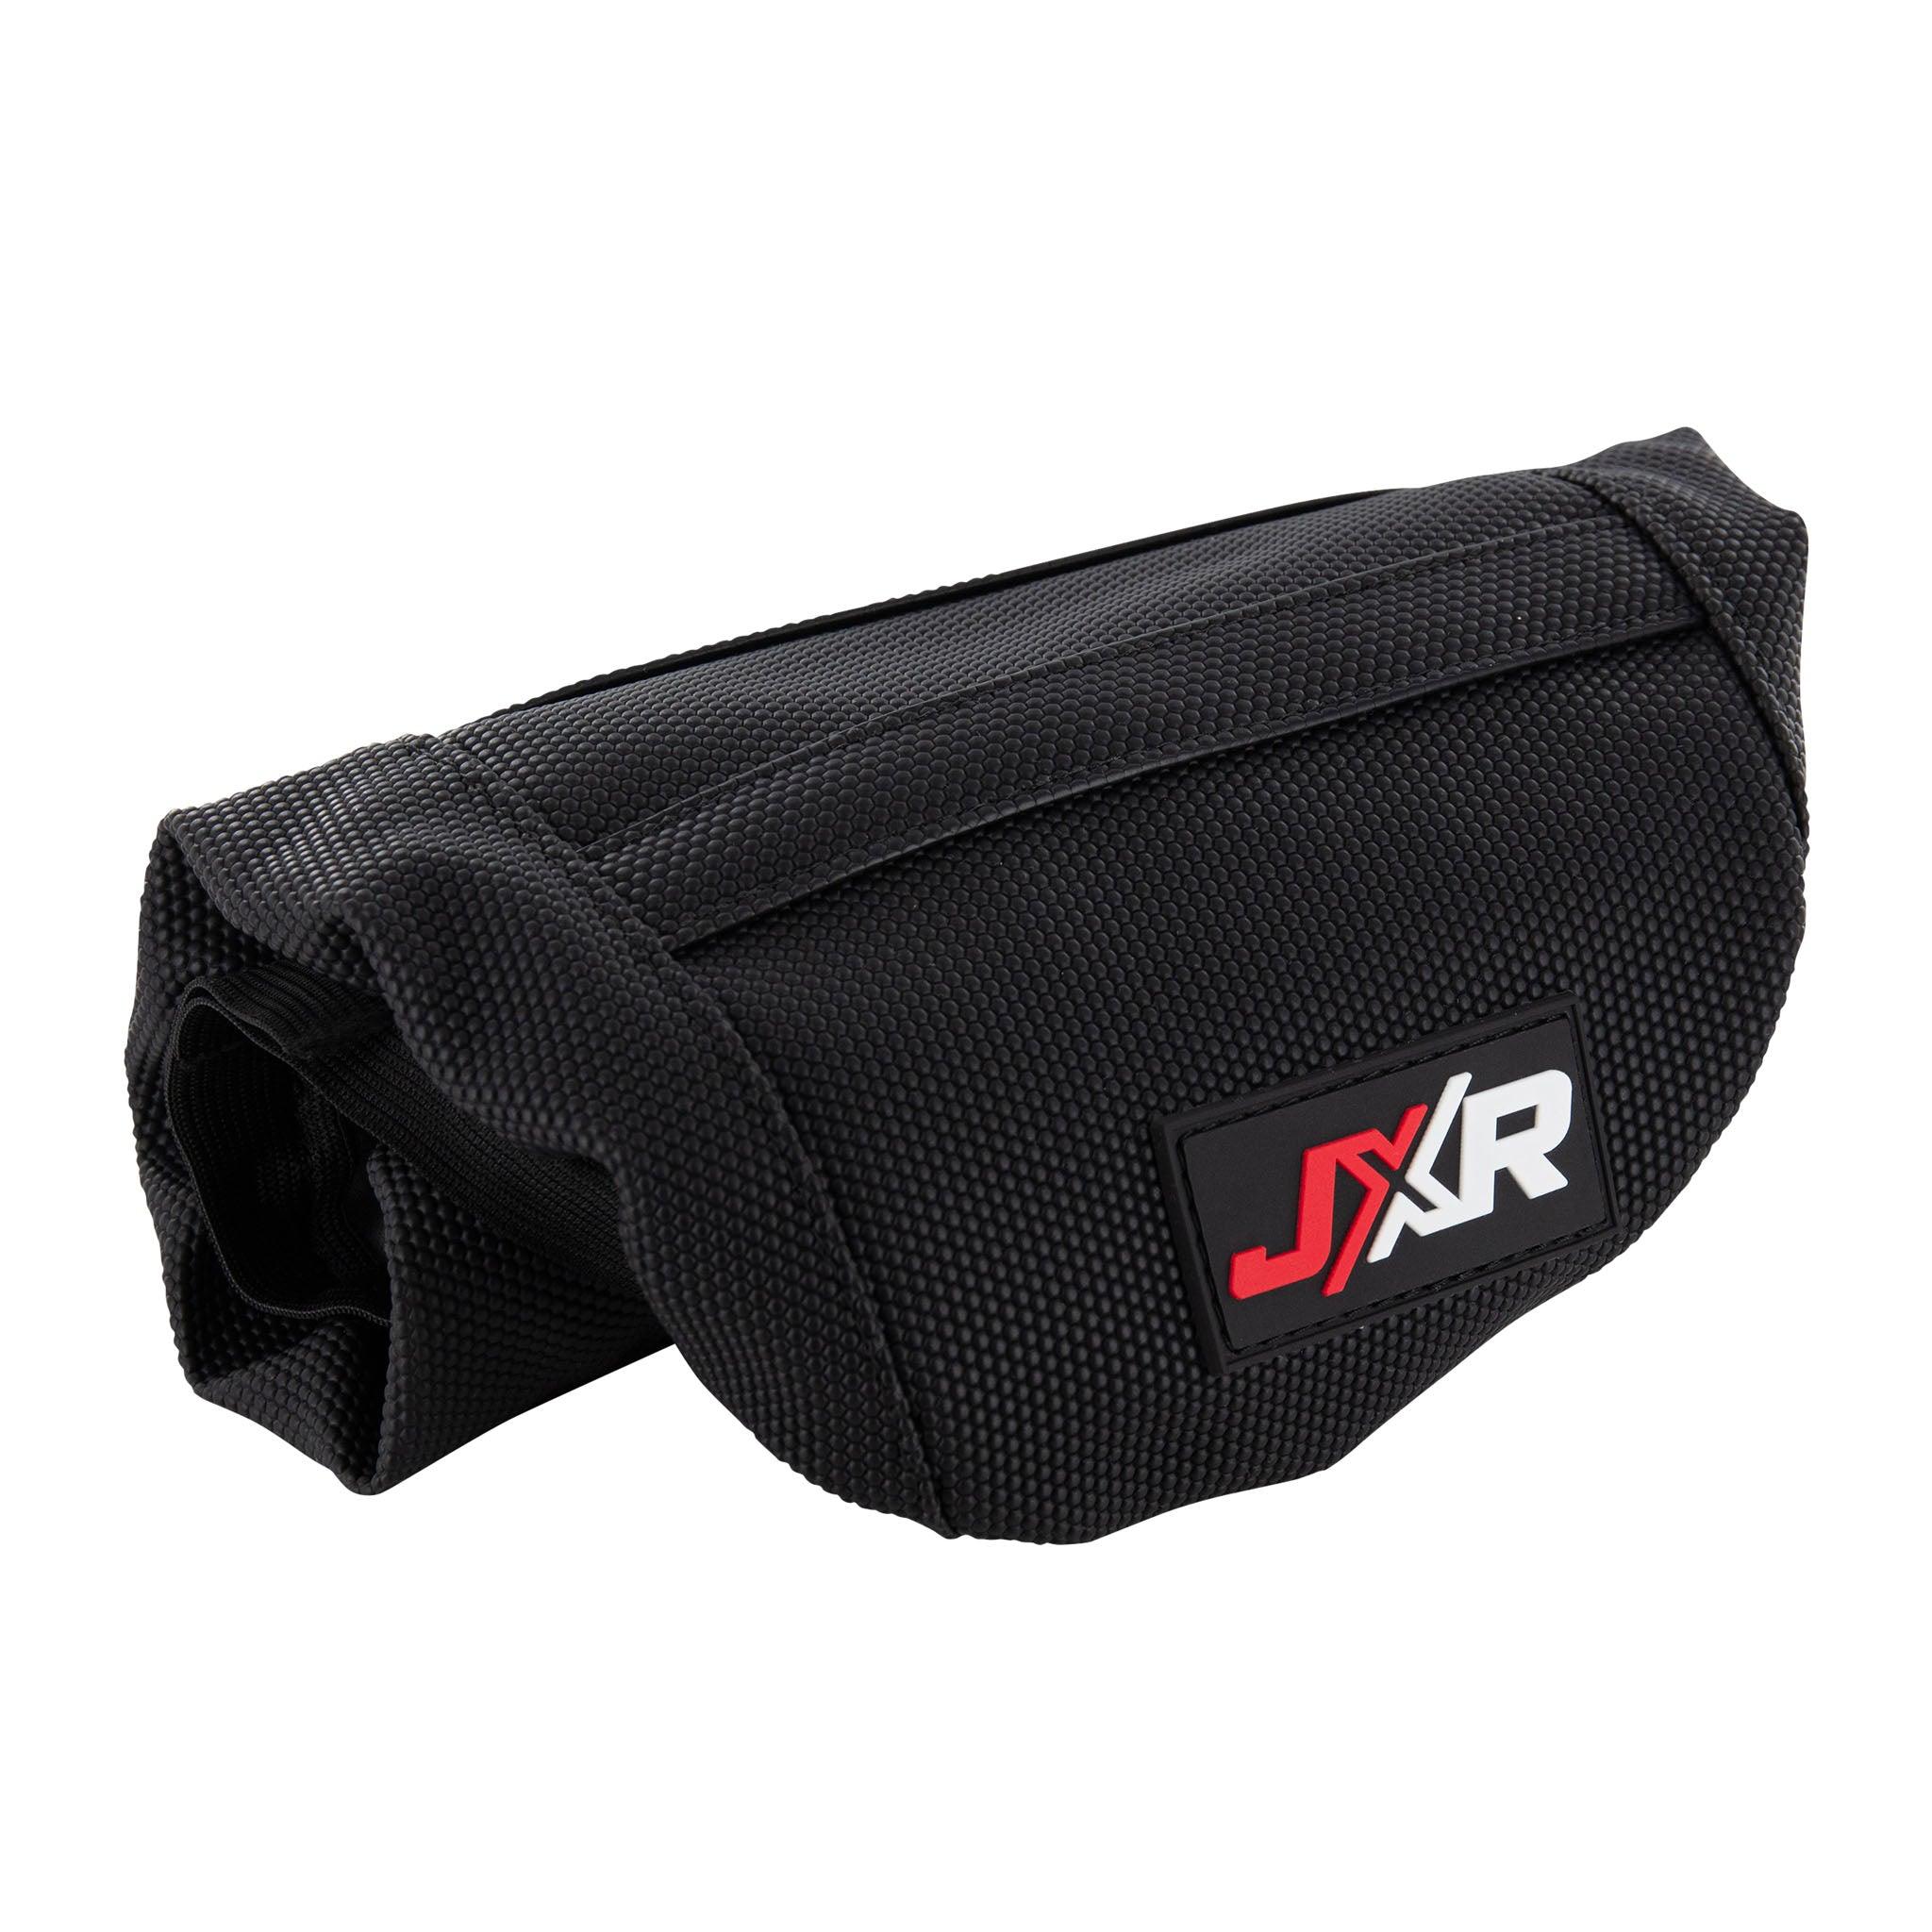 JXR Seat Cover to fit Surron Light Bee